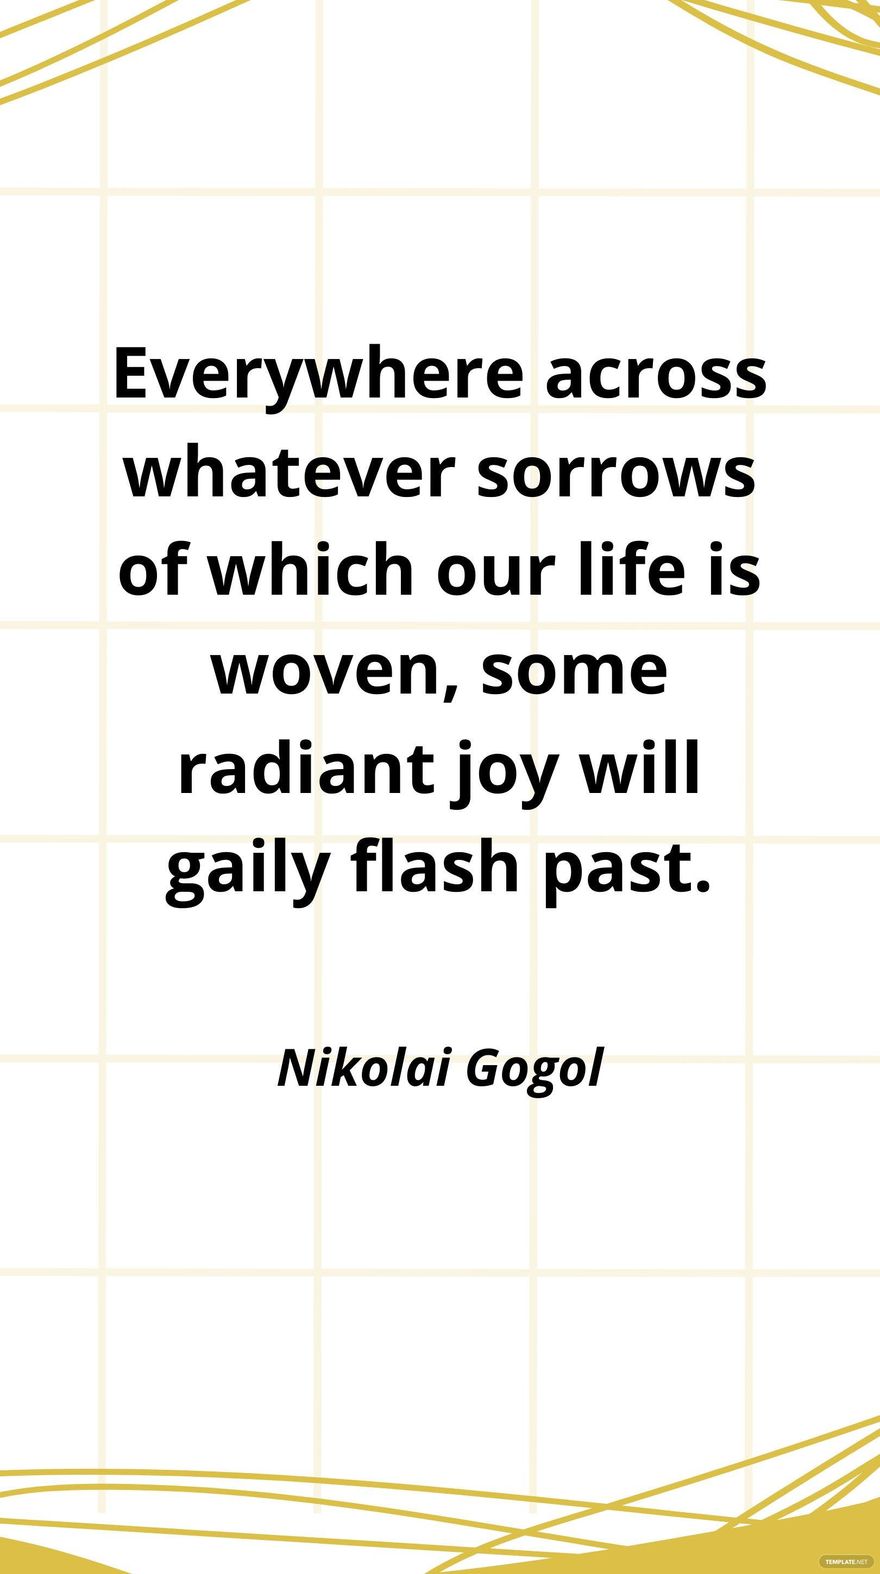 Free Nikolai Gogol - Everywhere across whatever sorrows of which our life is woven, some radiant joy will gaily flash past. in JPG